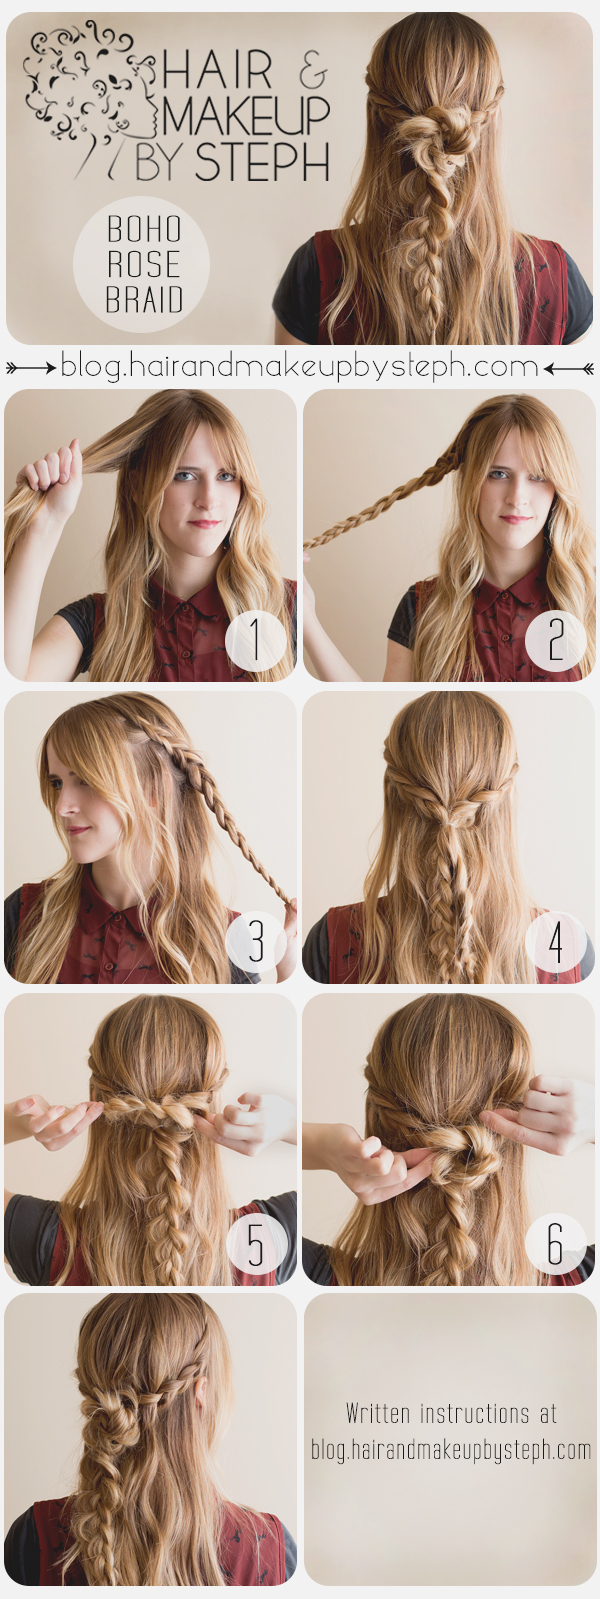 Braided hairstyle tutorial for young ladies